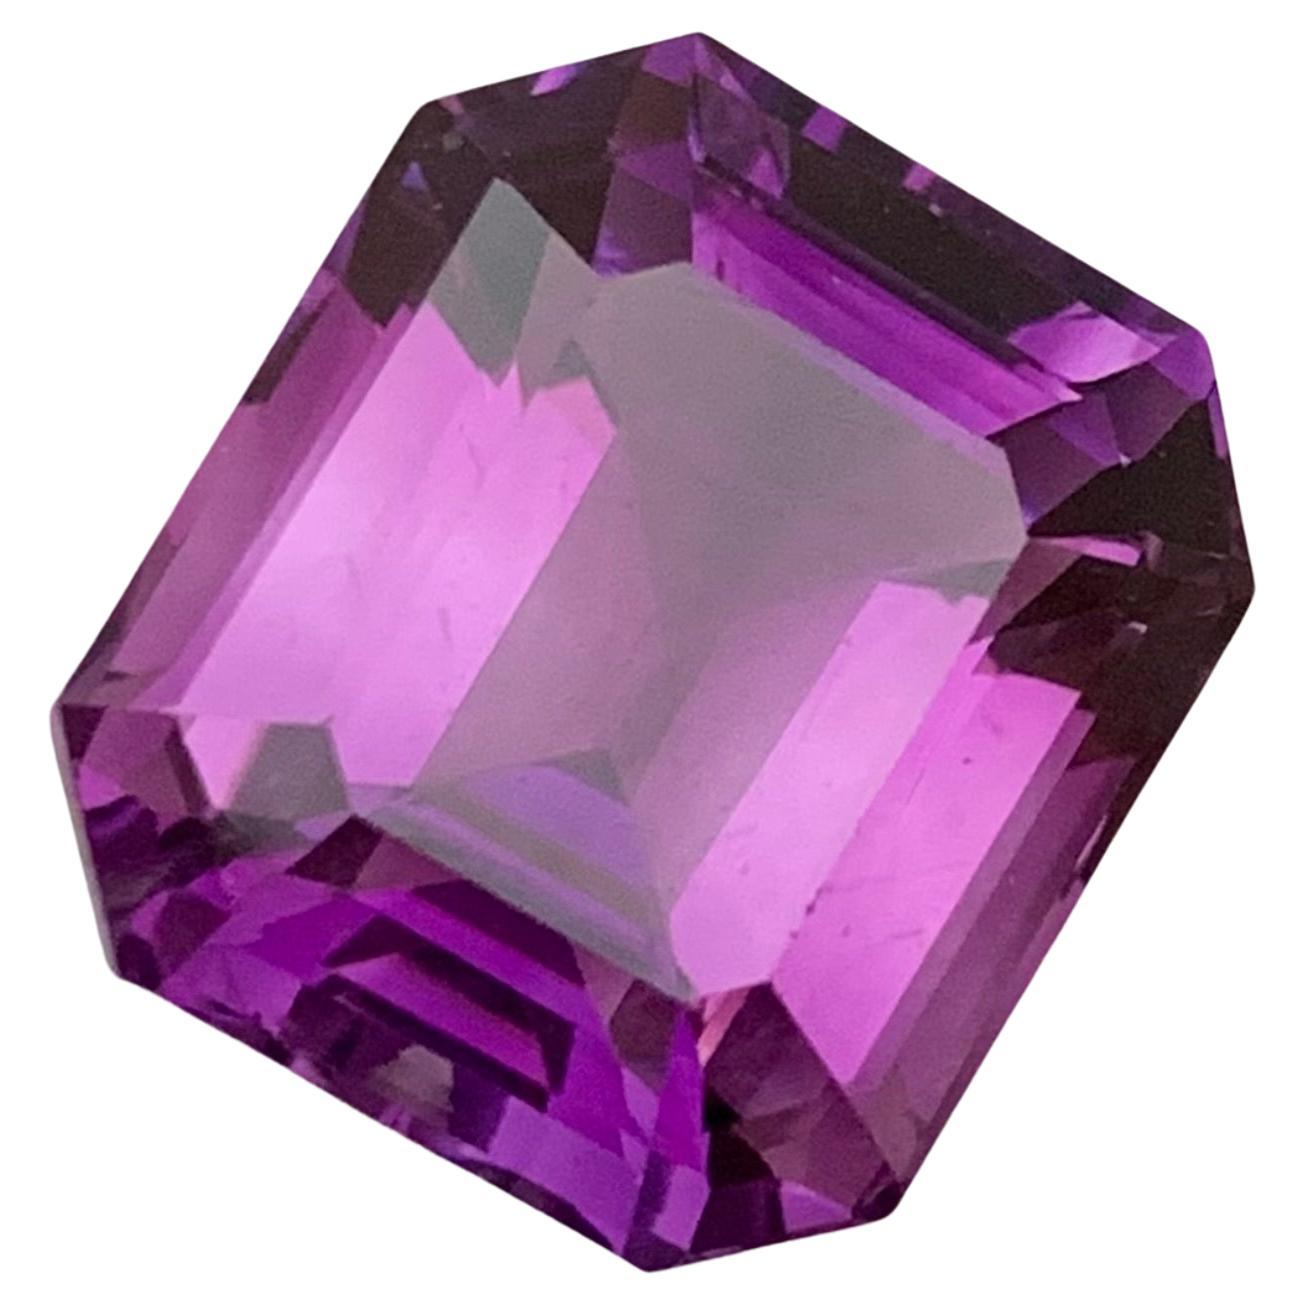 19.0 Carats Natural Loose Deep Purple Amethyst Gemstone From Brazil Mine For Sale